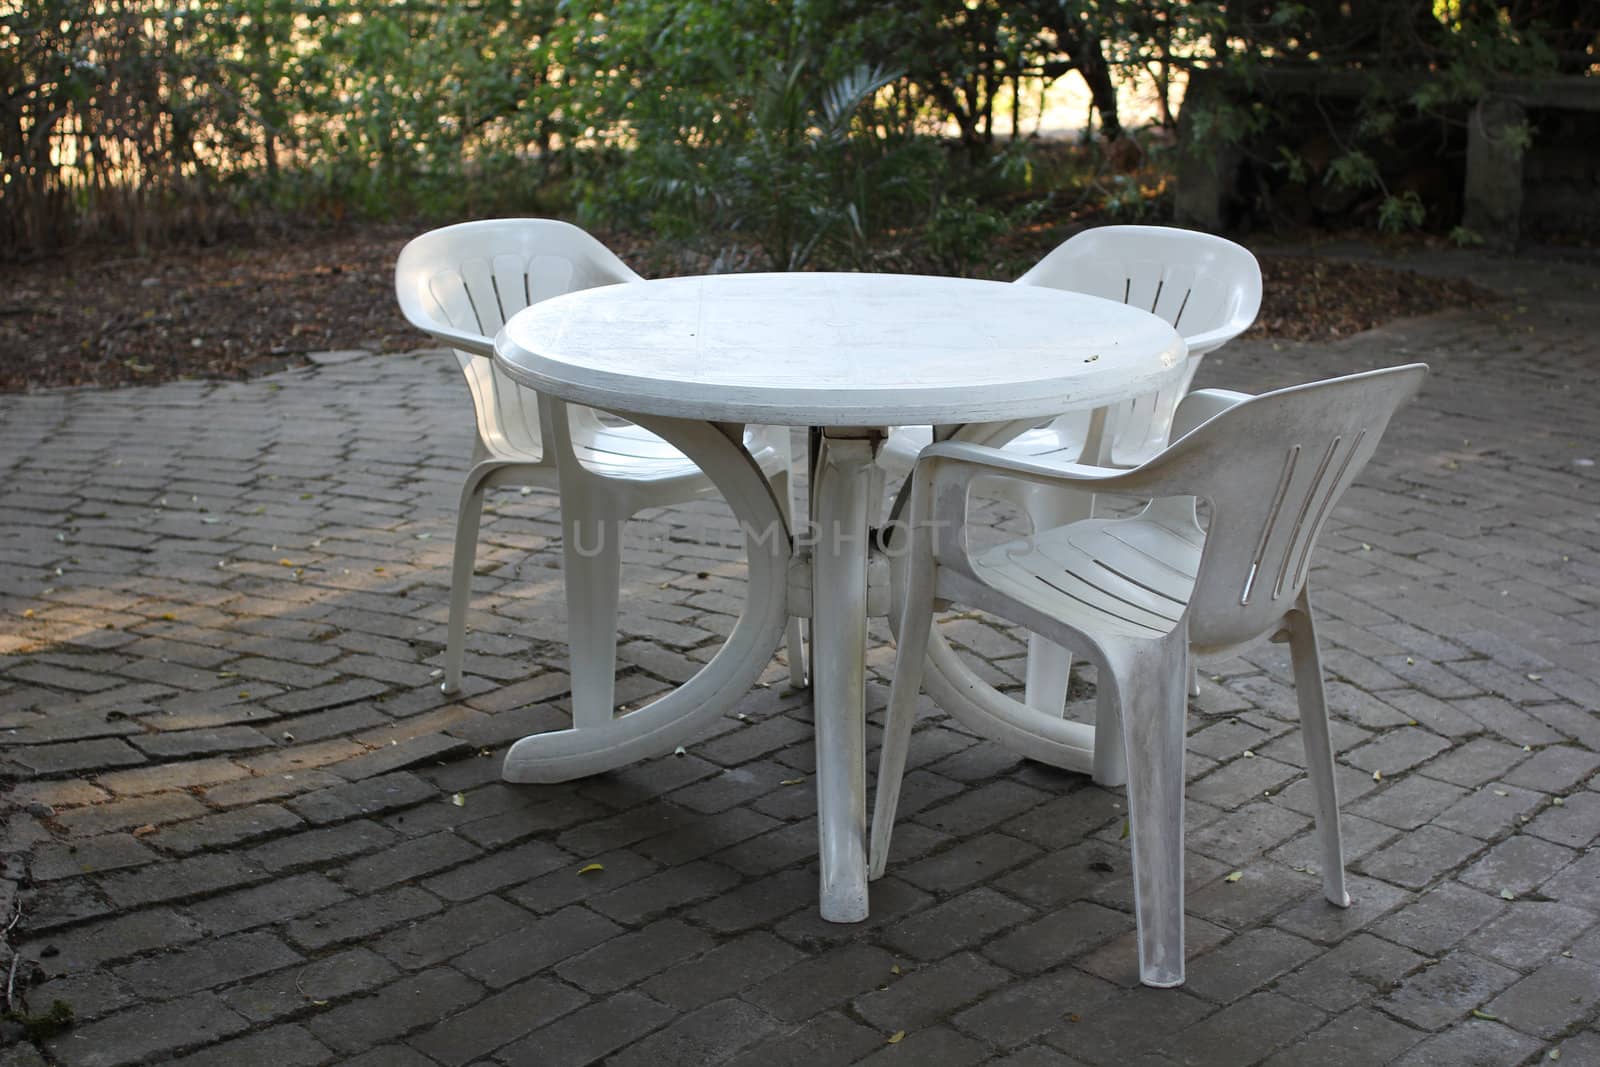 Plastic table with plastic chairs by dwaschnig_photo